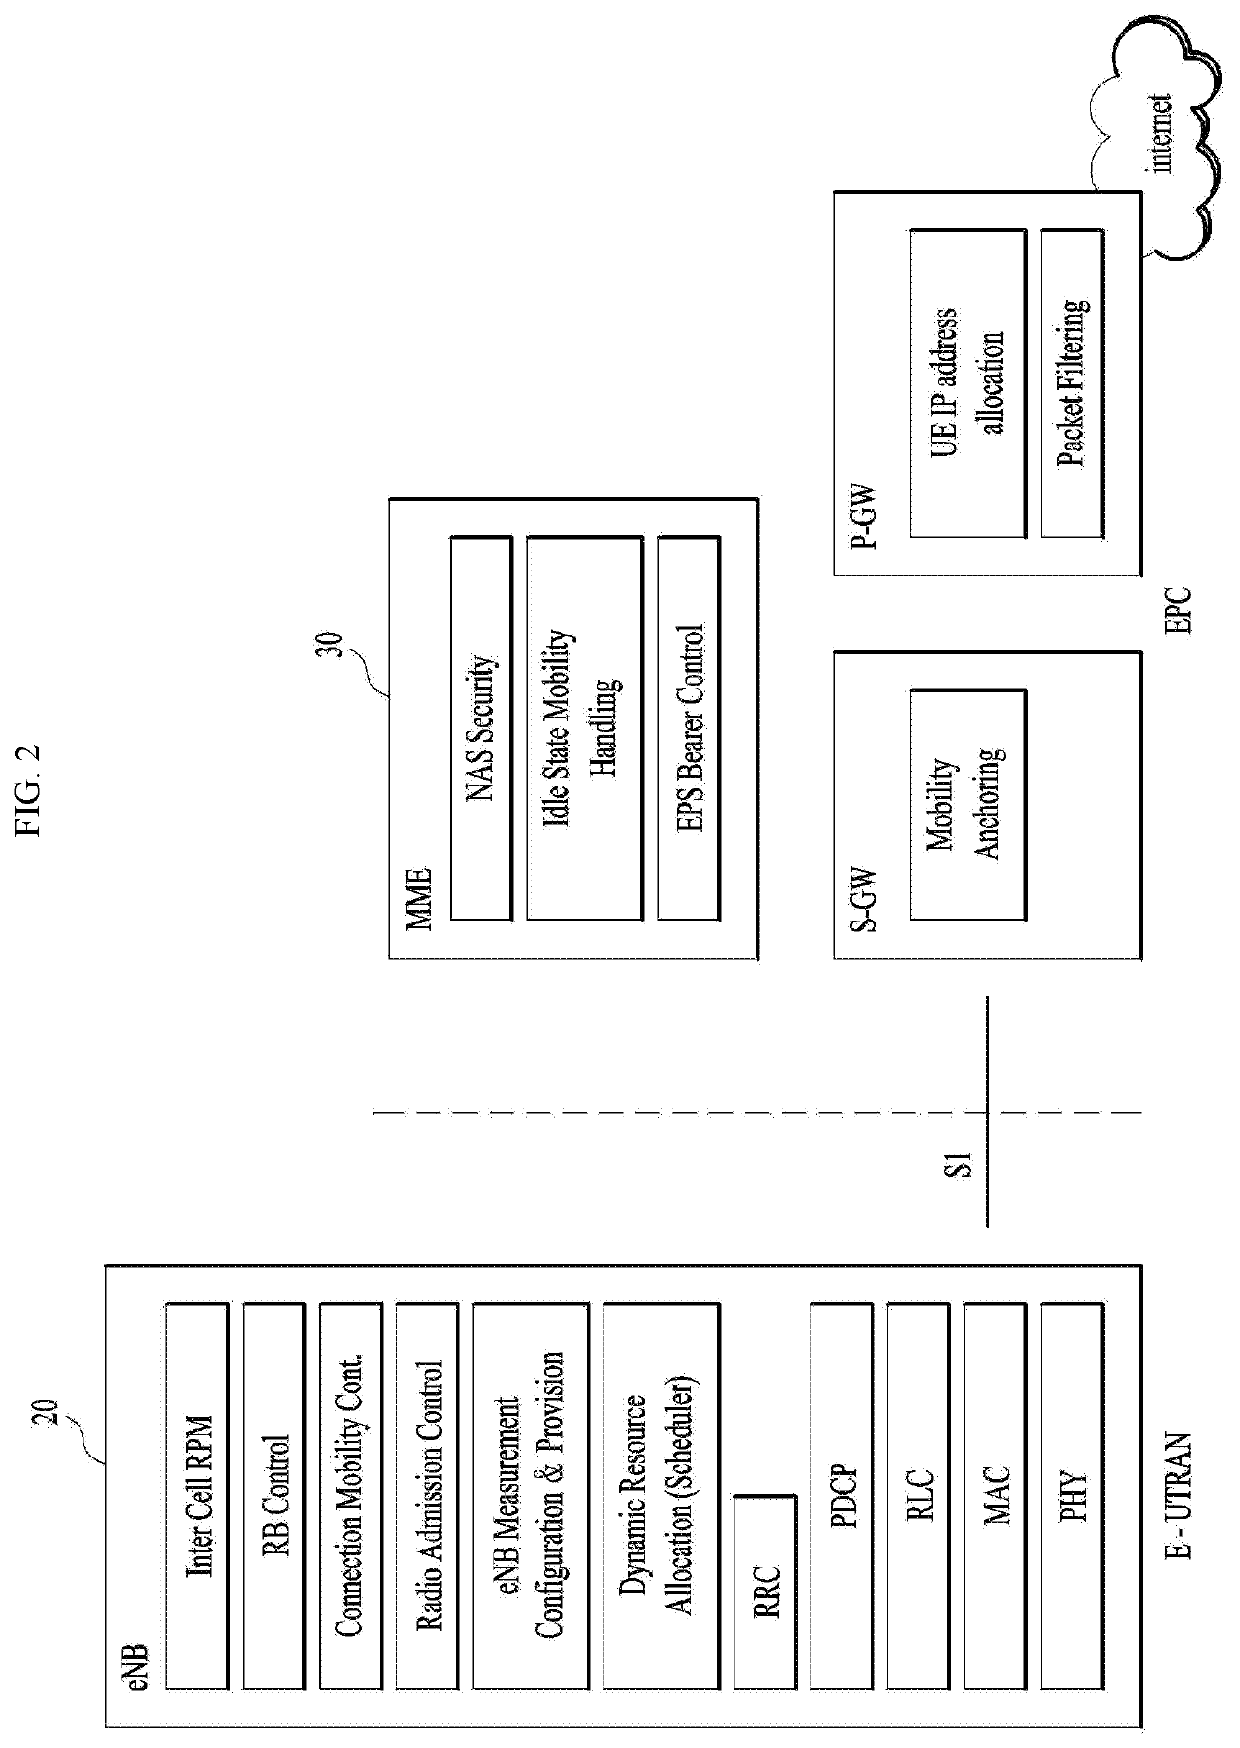 Apparatus and method for performing a random access procedure